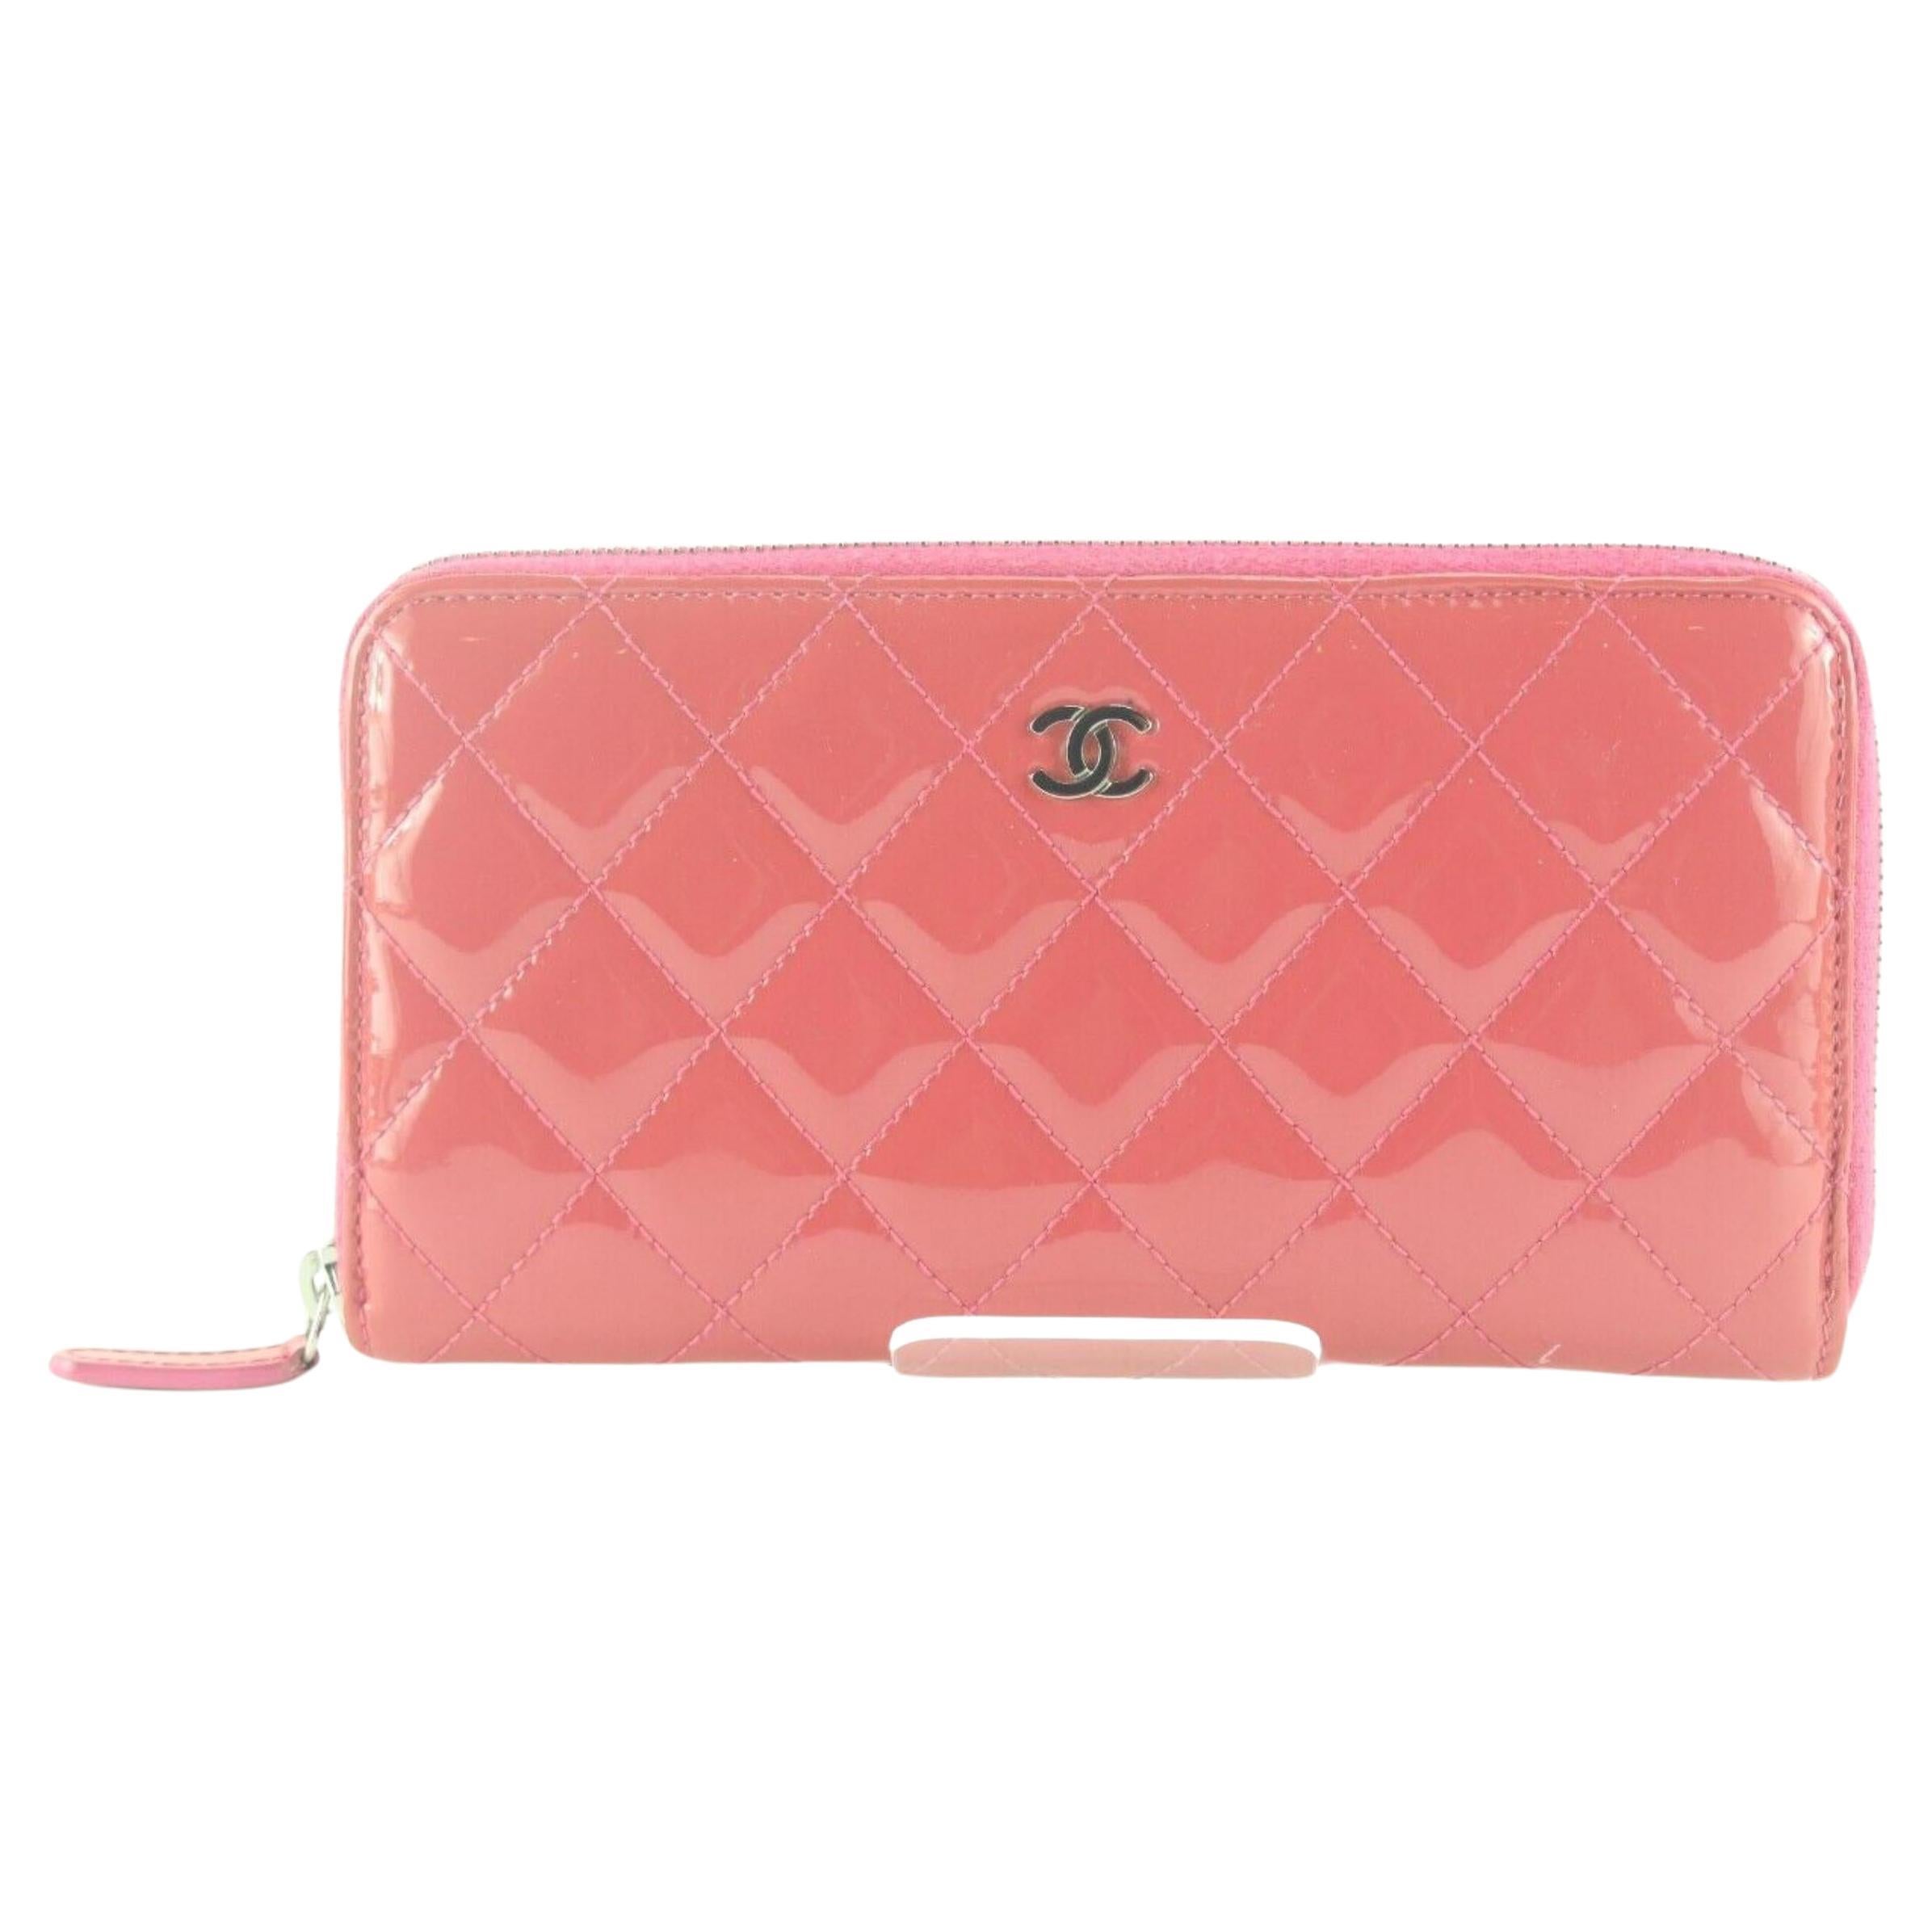 Chanel Pink Quilted Zip Wallet Zippy 4CC712K For Sale